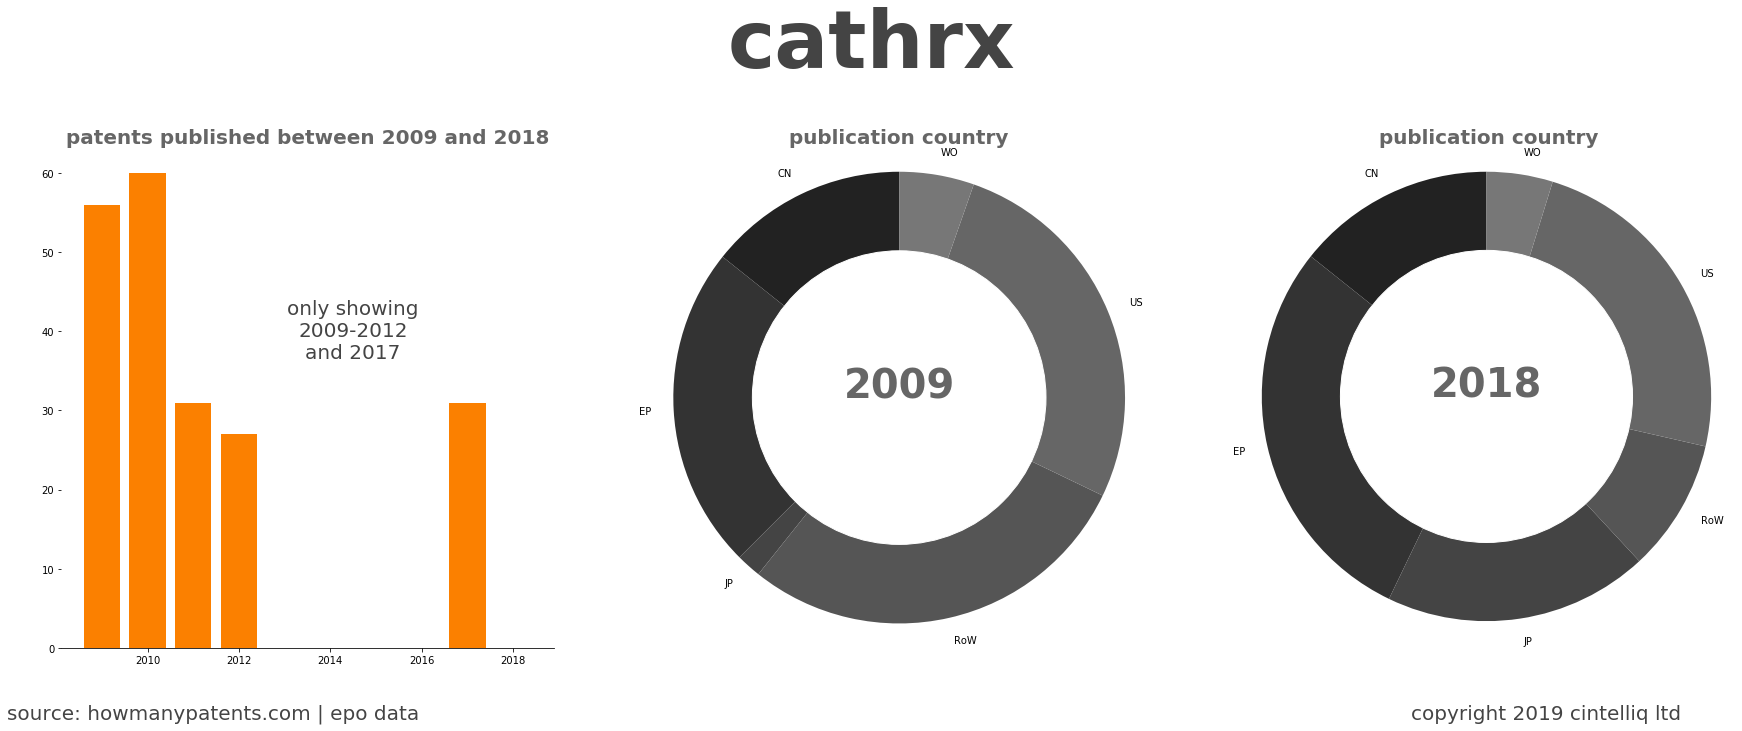 summary of patents for Cathrx